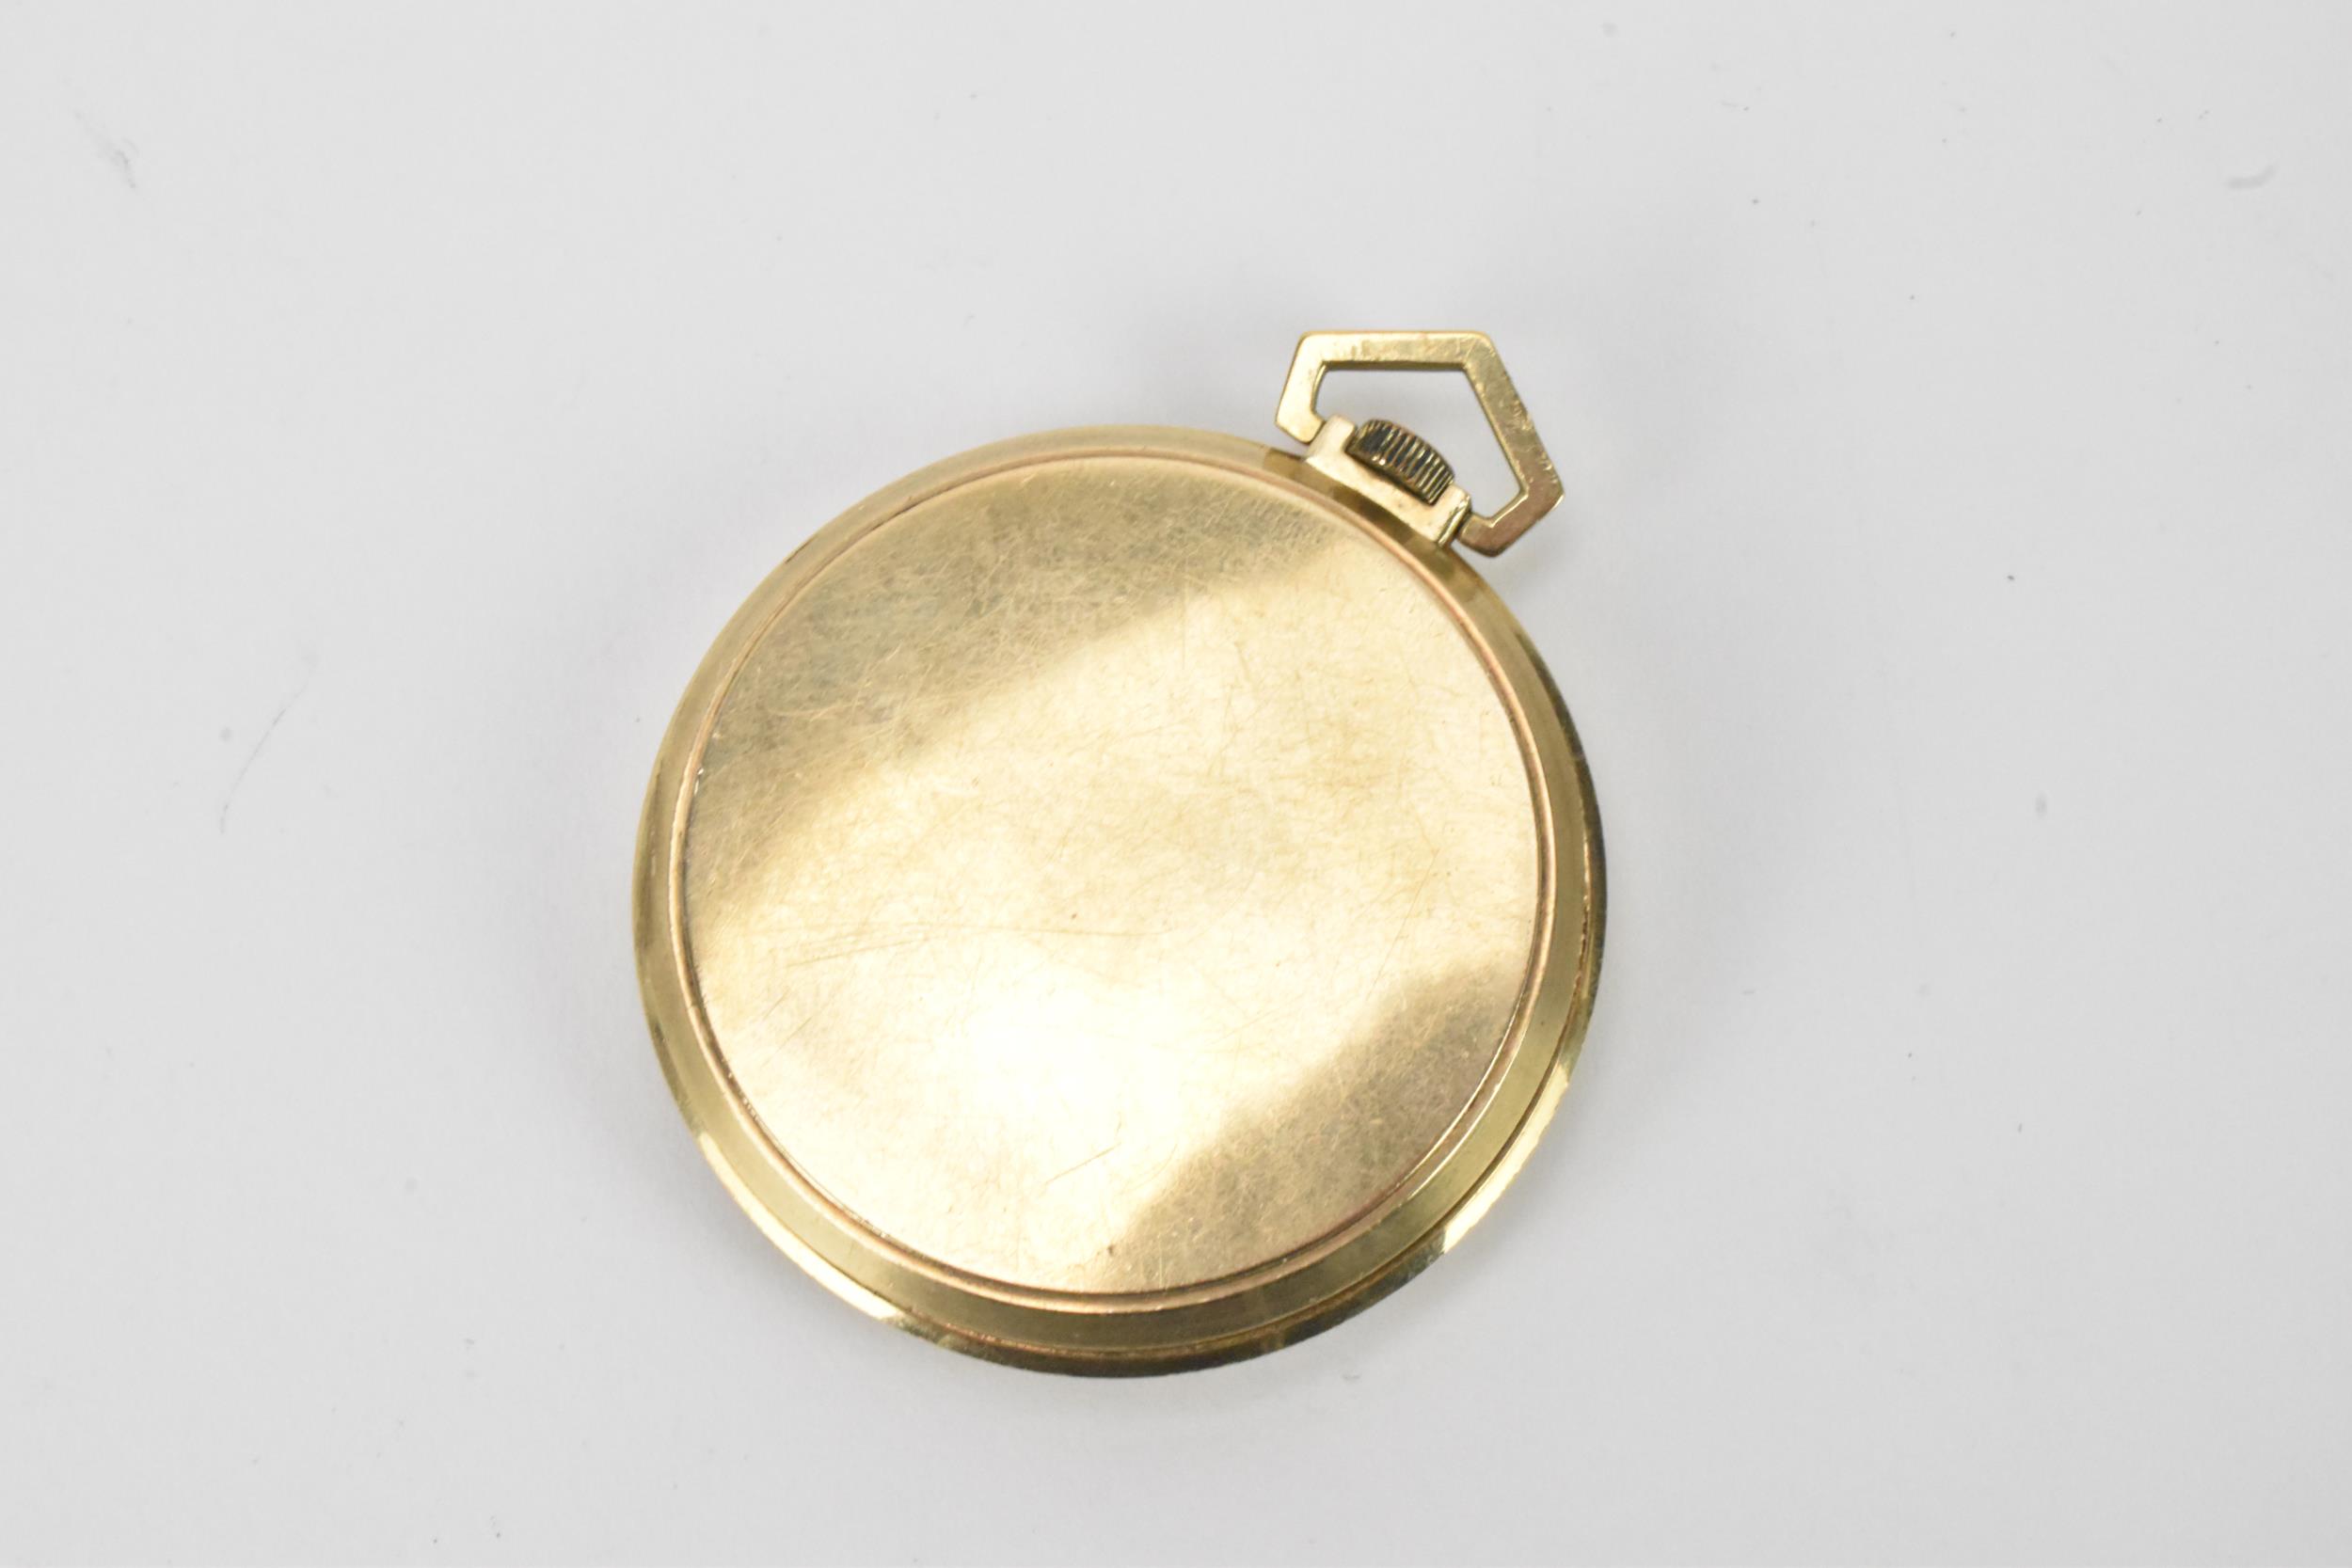 A Cortebert 1930s, 9ct gold, open faced pocket watch - Image 2 of 5